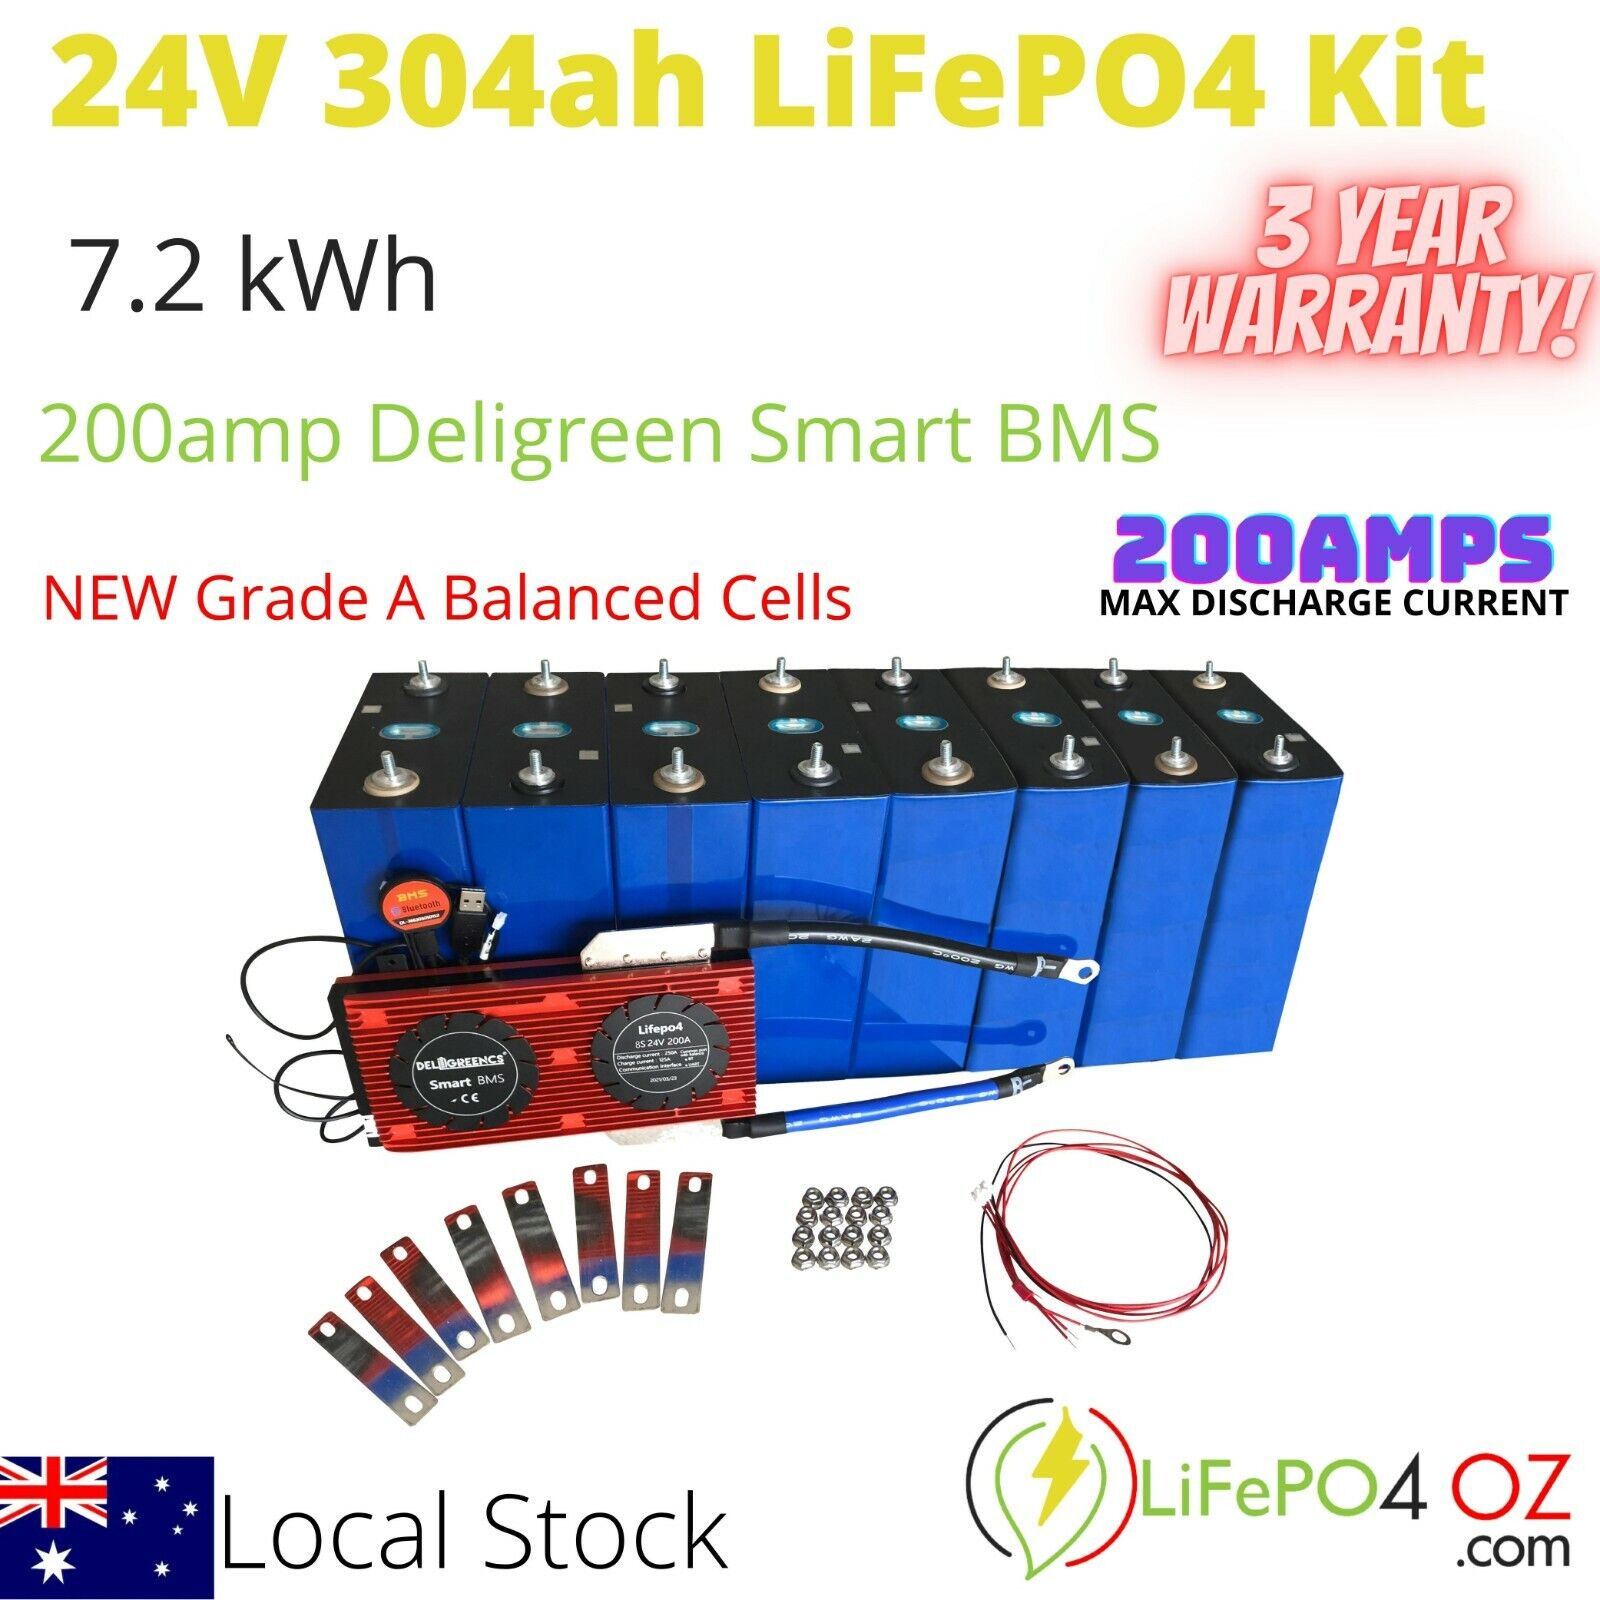 24V EVE 304Ah 7.2kWh LiFePO4 Battery Pack Kit with 200A Deligree